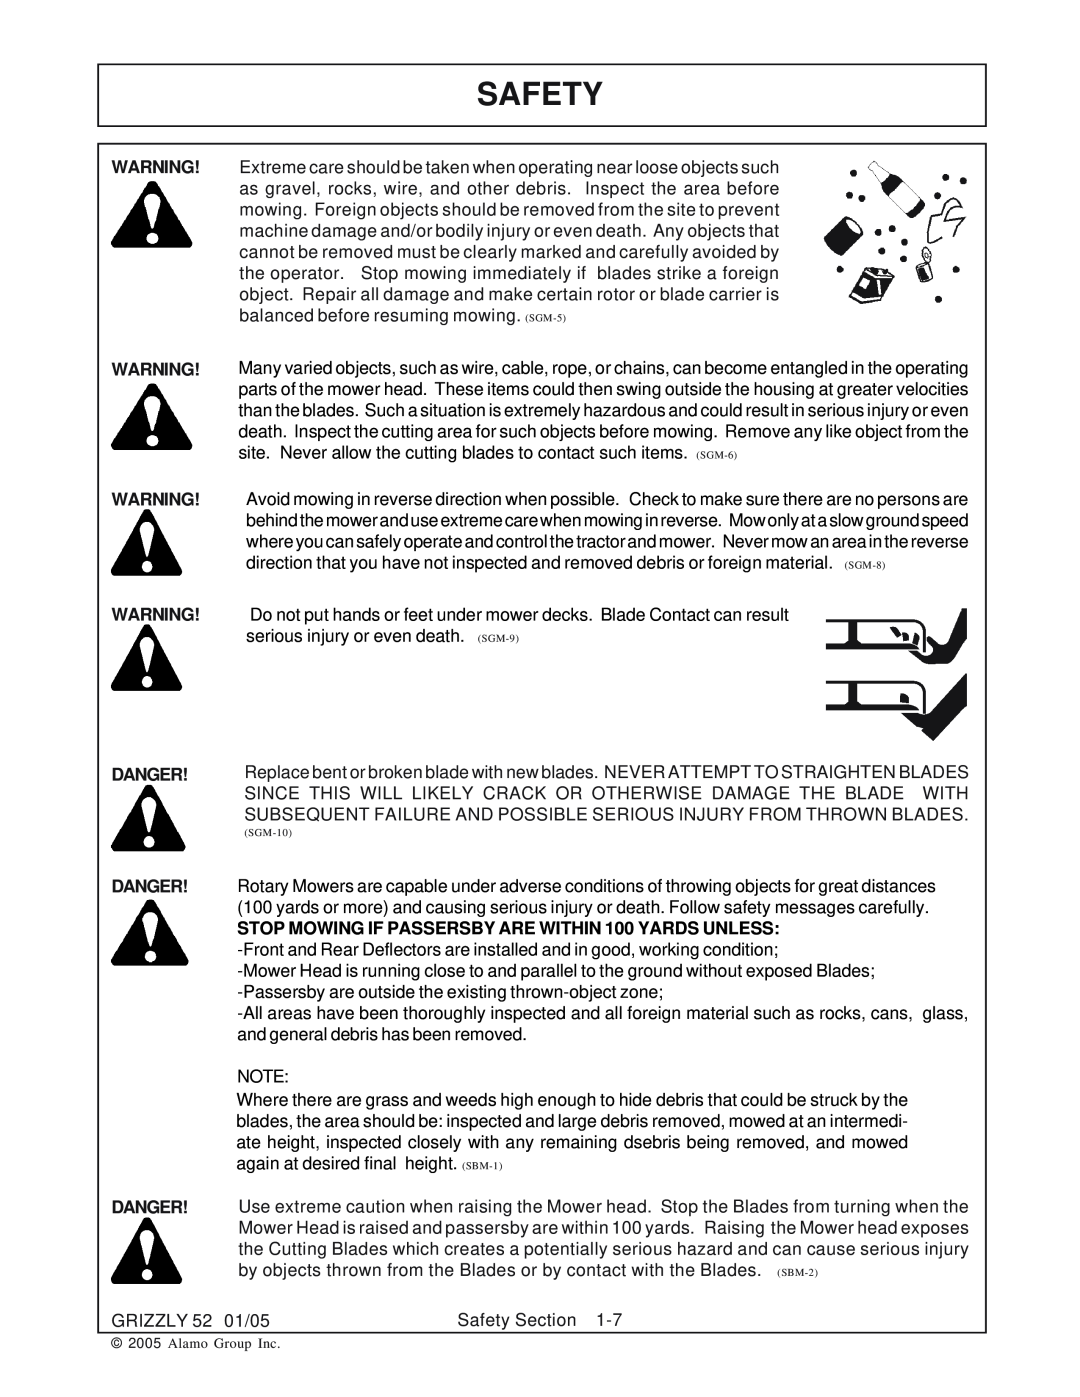 Grizzly 52 manual Safety, Danger Danger, SGM-10 